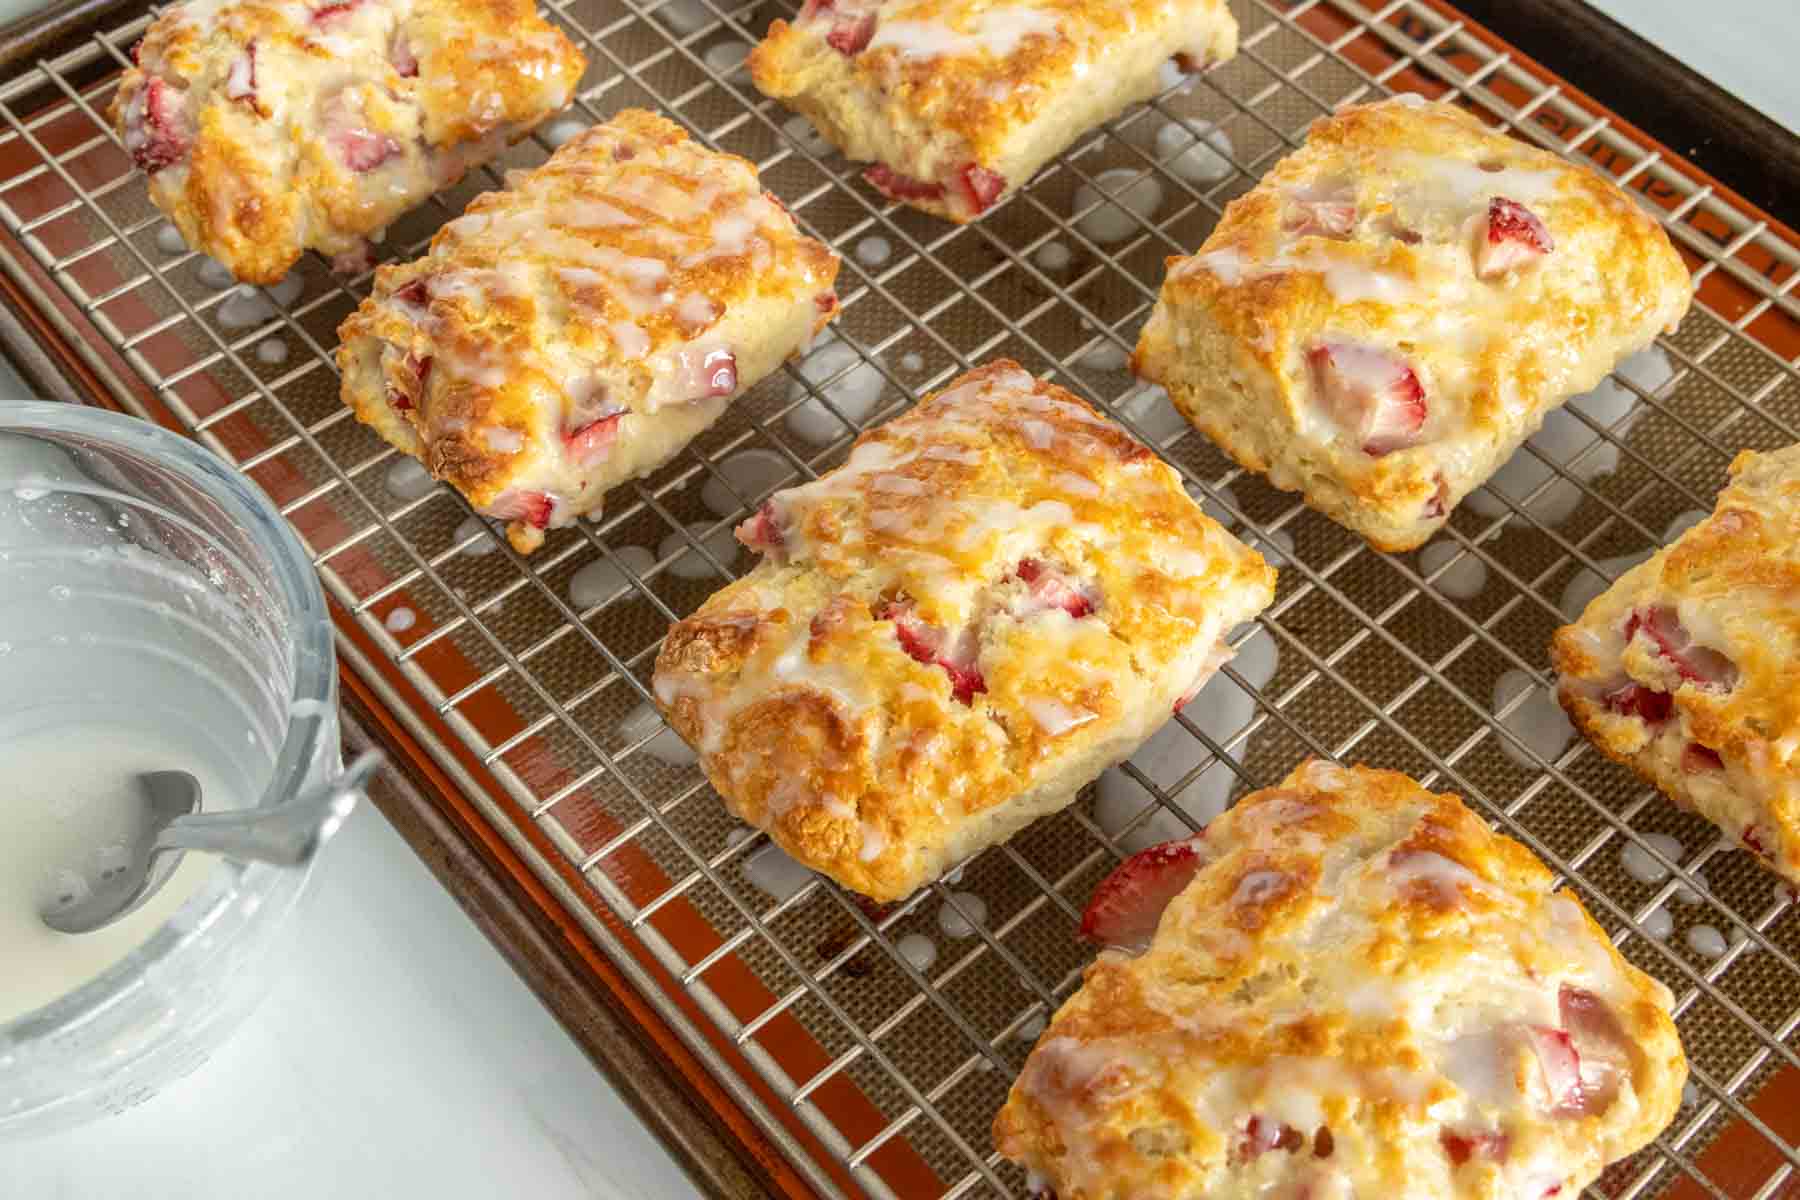 Freshly baked strawberry biscuits with glaze on a cooling rack beside a glass jar of glaze.